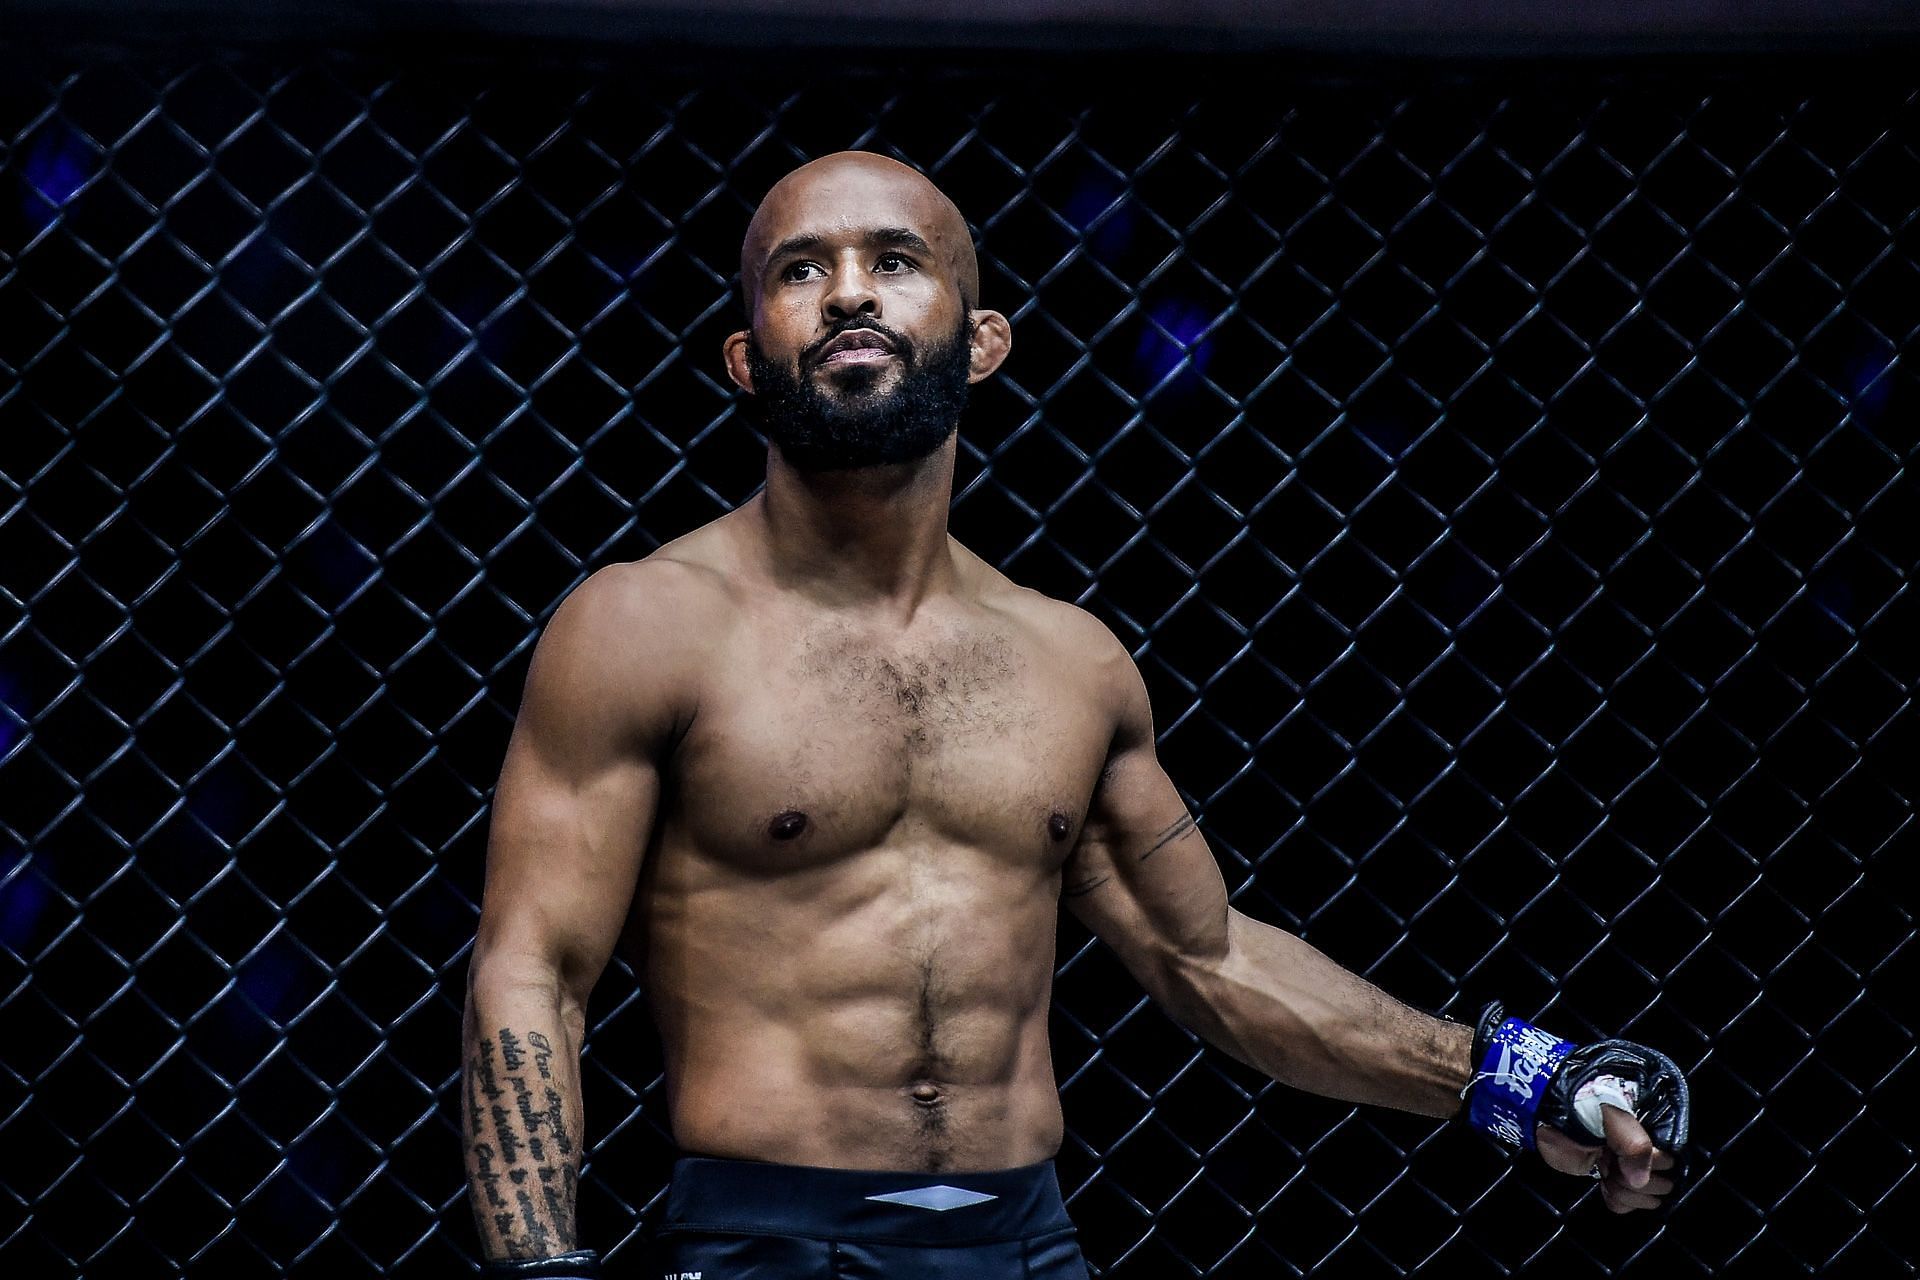 Demetrious Johnson was controversially traded away to ONE FC in 2018